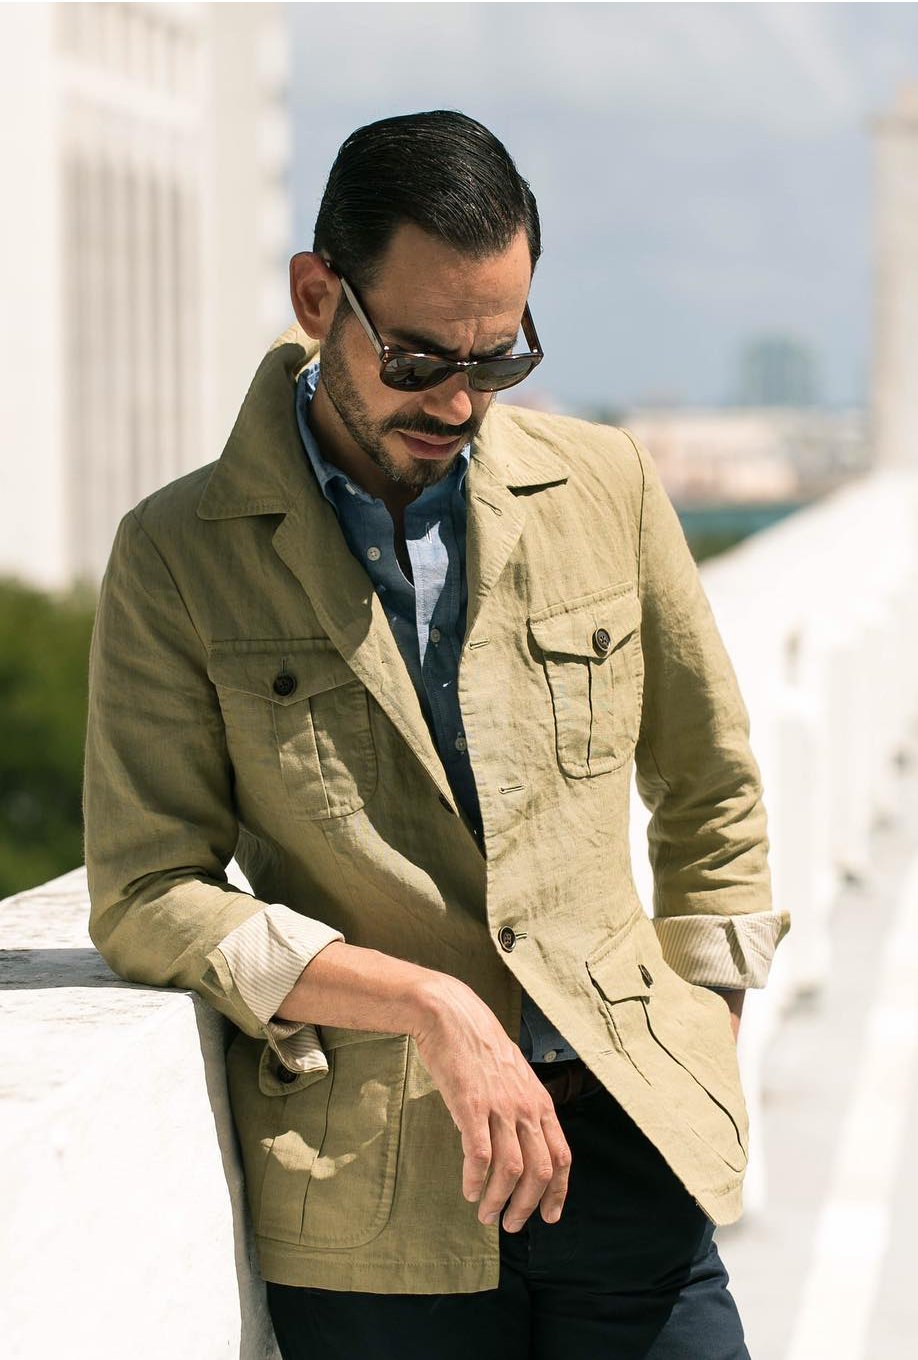 The Return of a Classically Cool Jacket | Valet.